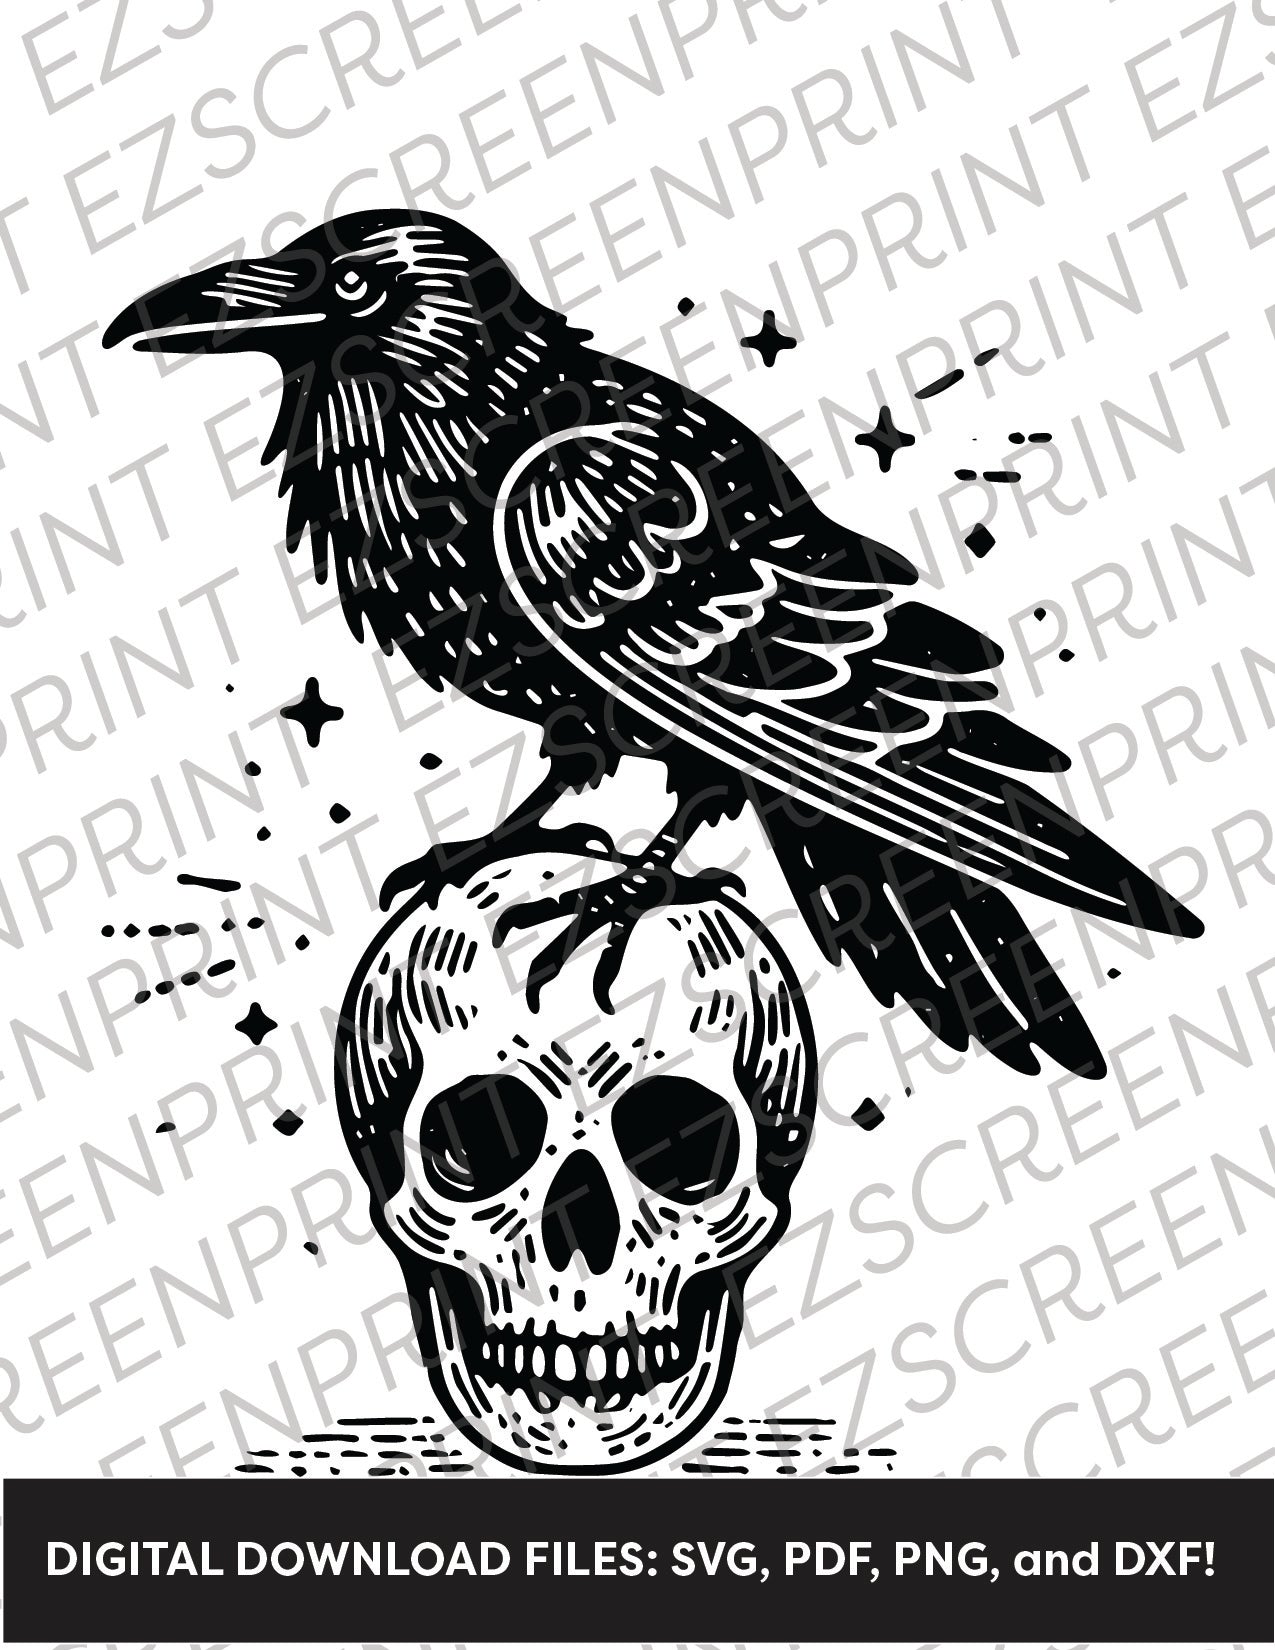 Skull and Raven, Various Sizes + Digital Download